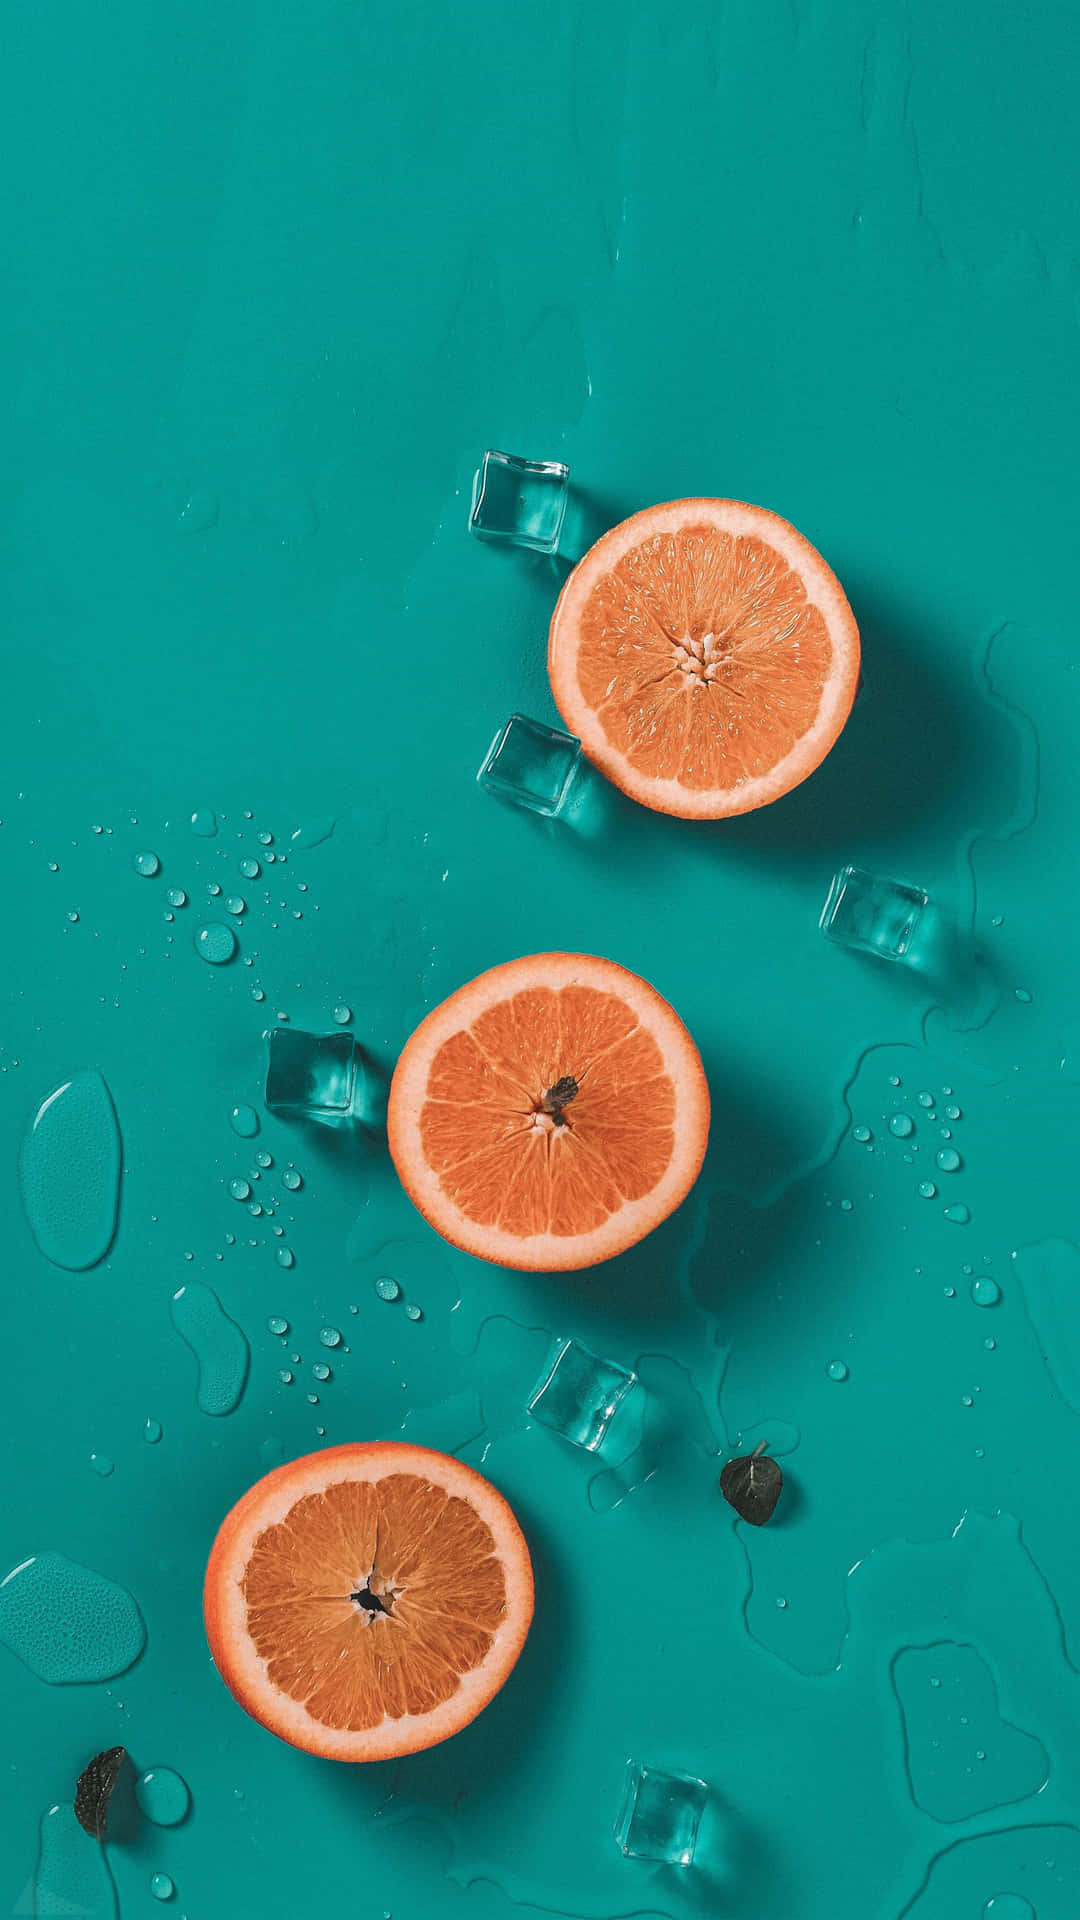 Slices Of Orange And Teal Wallpaper